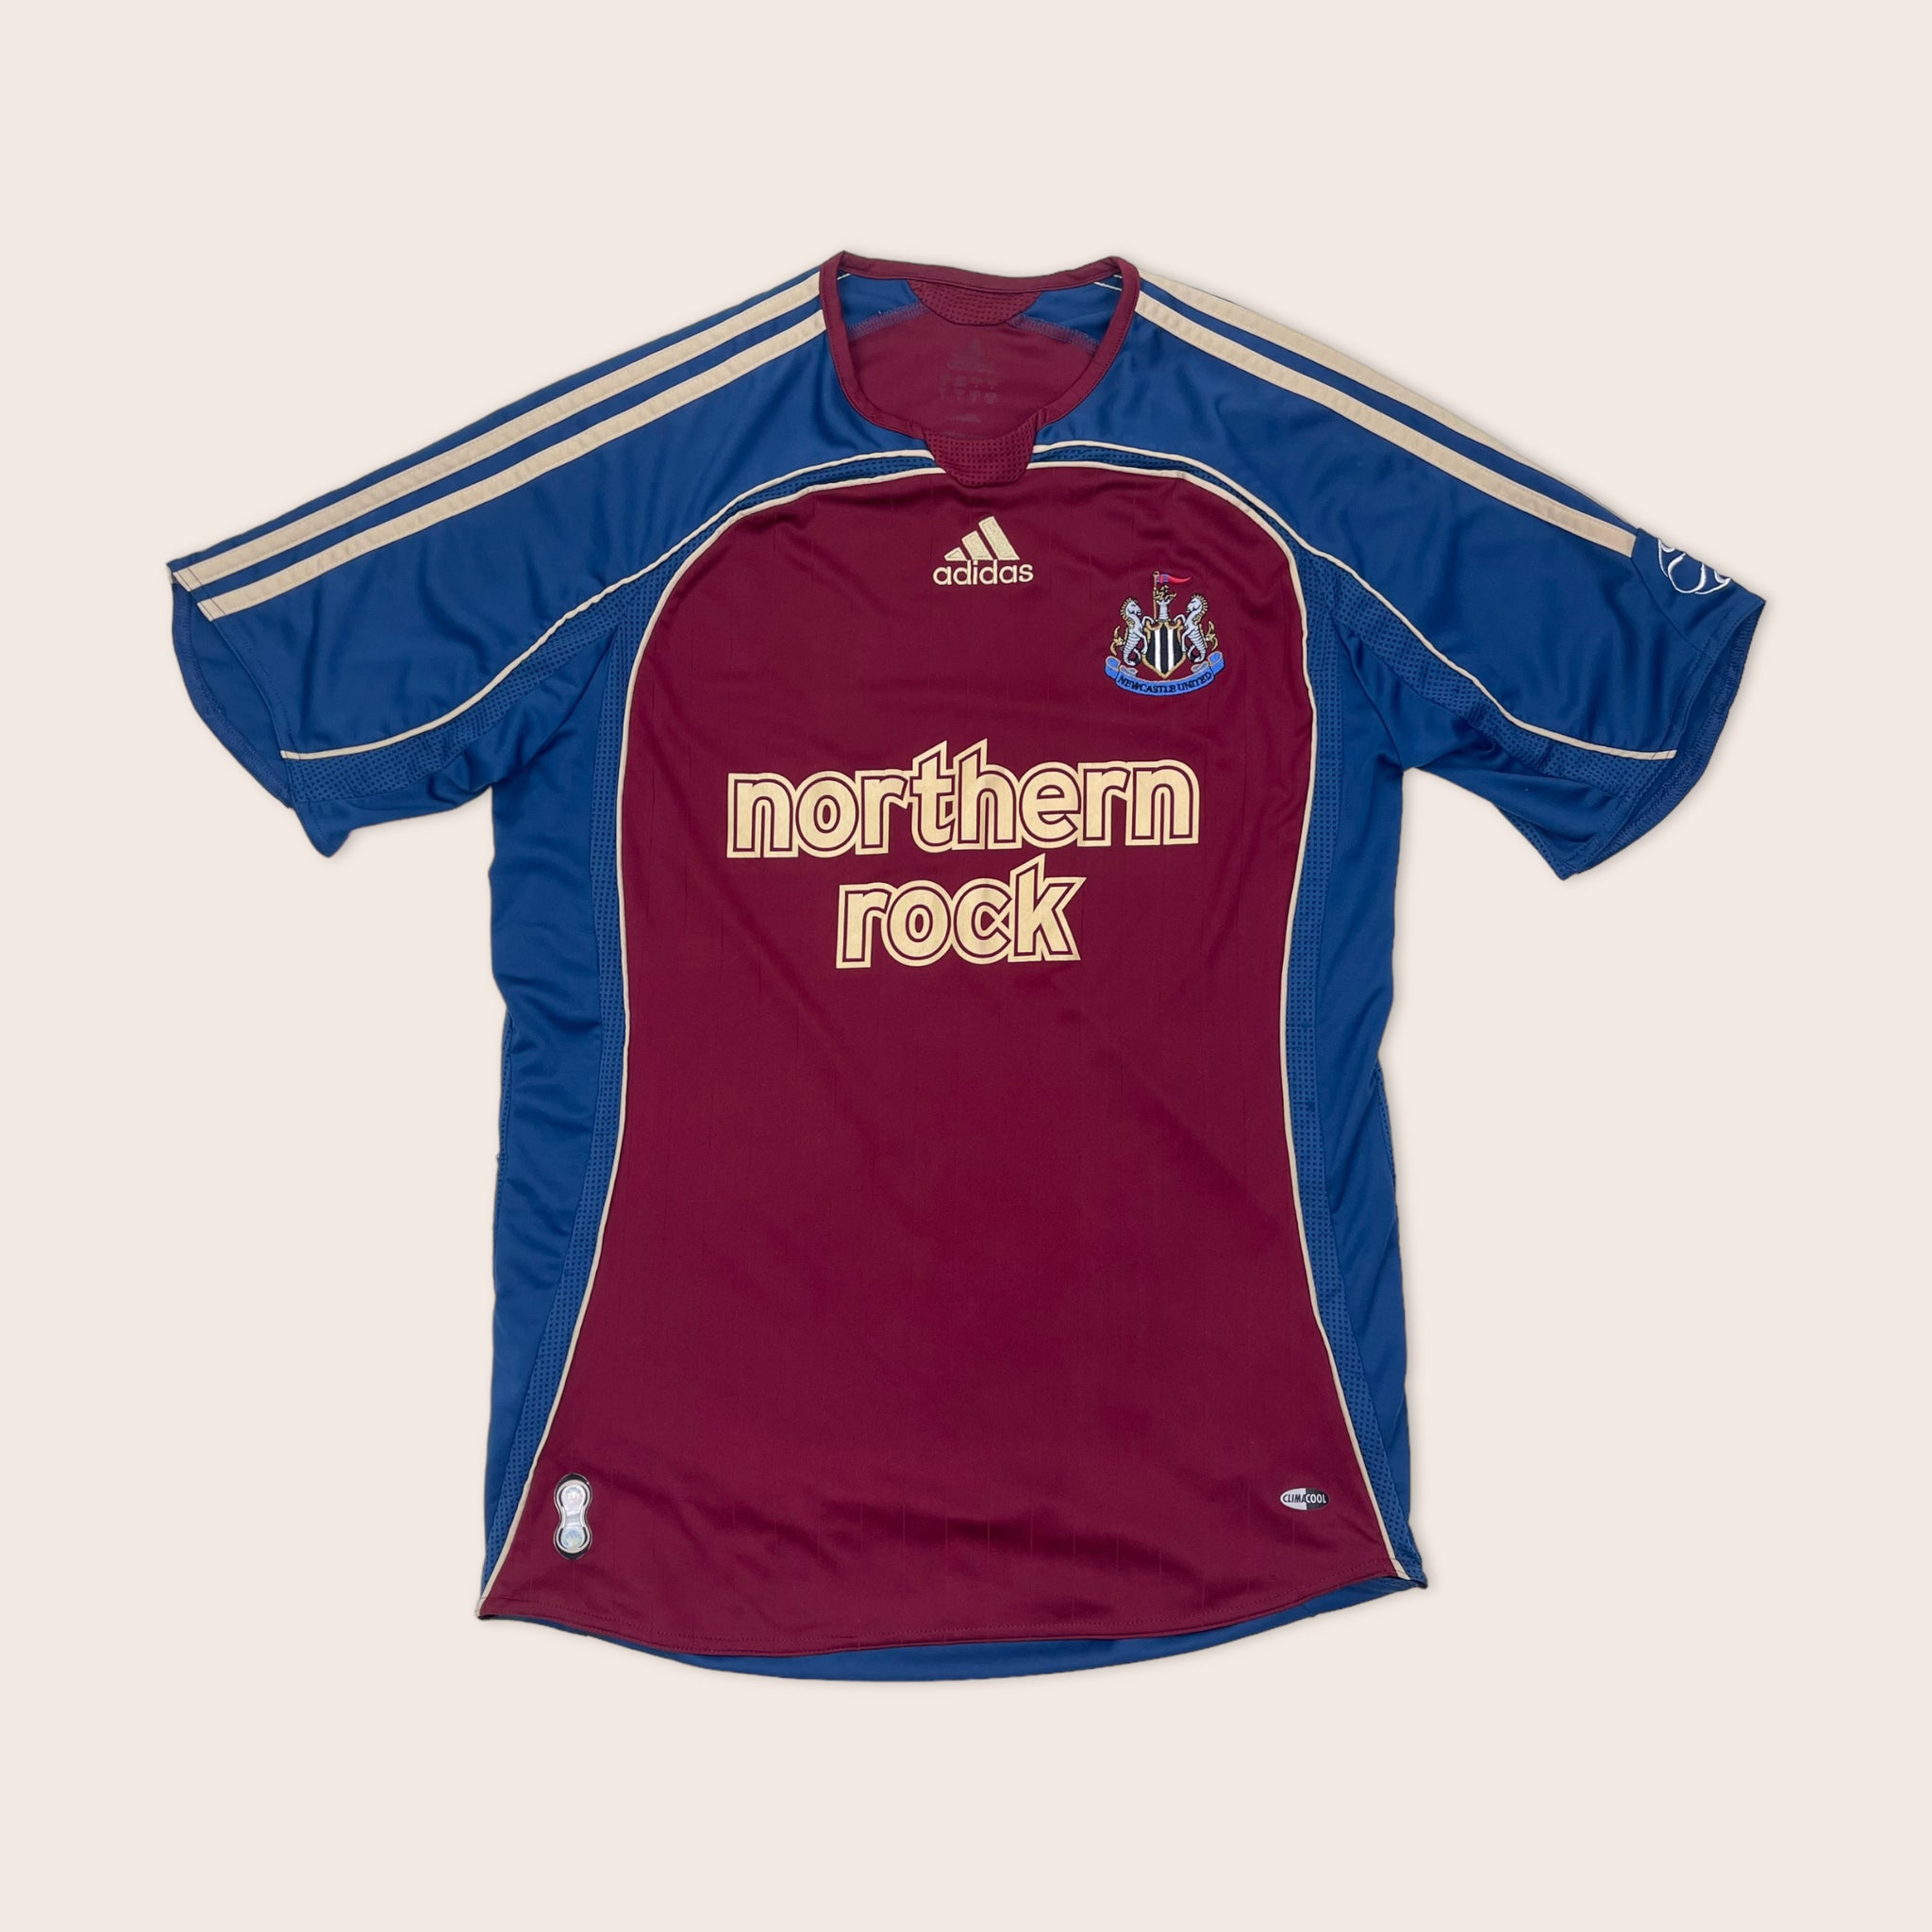 Newcastle United adidas home kit with Northern Rock